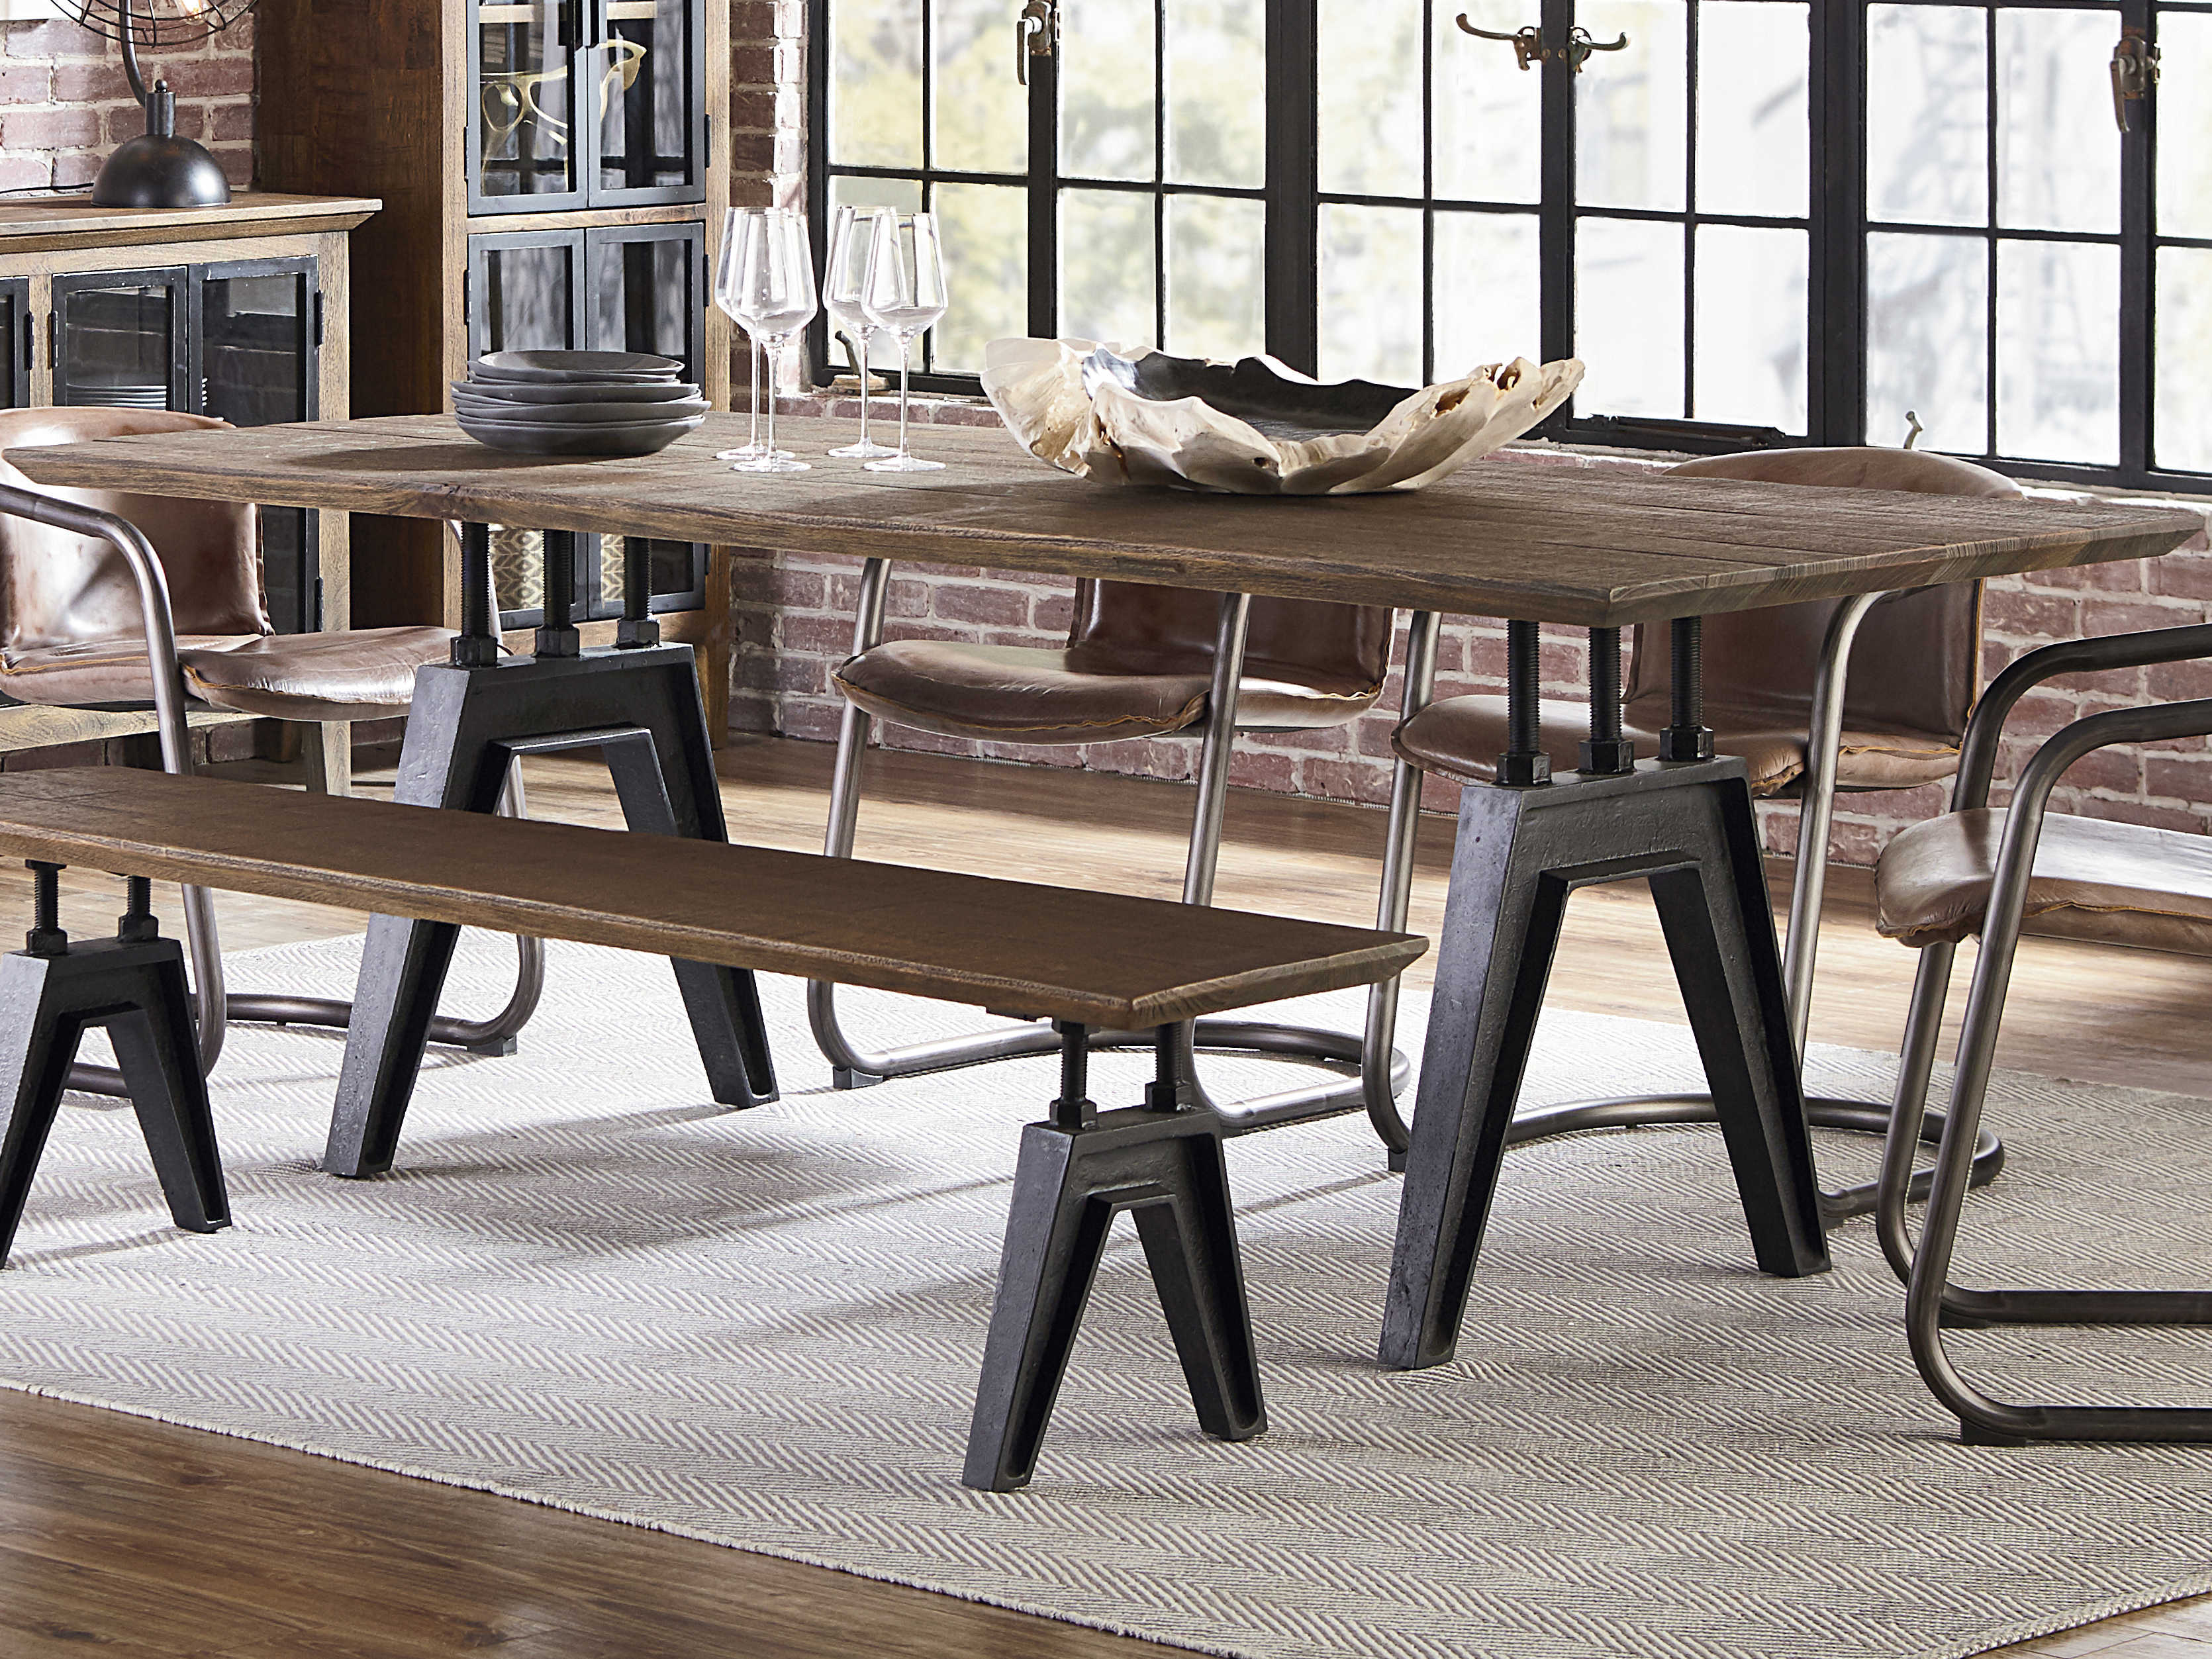 Caring For Dakota Dining Room Table Protect